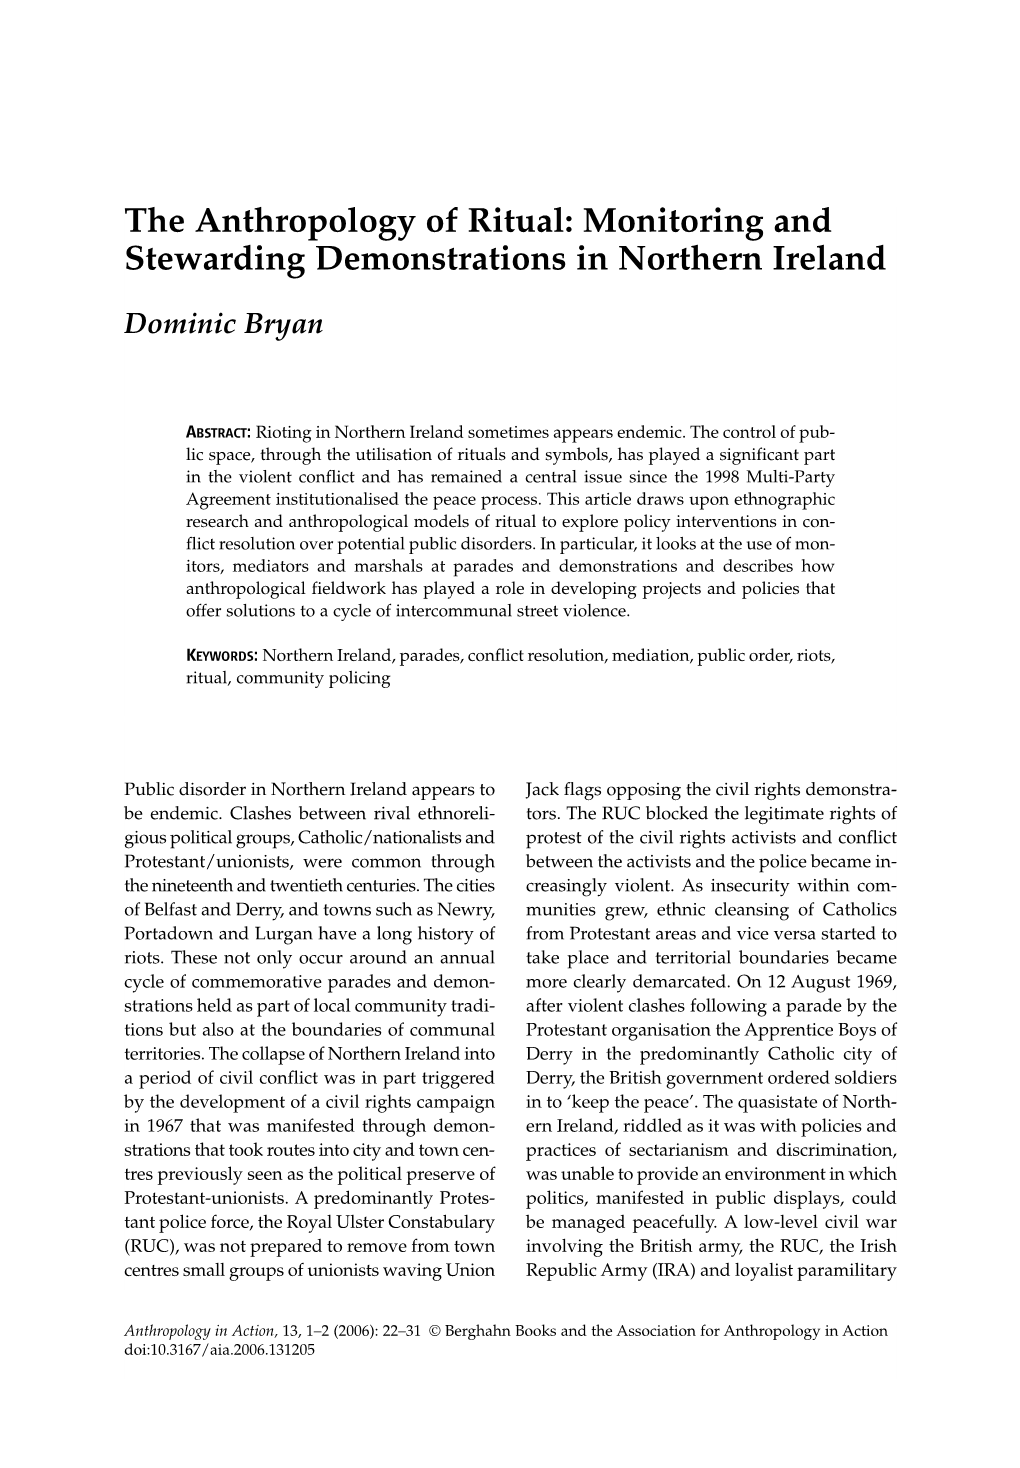 Monitoring and Stewarding Demonstrations in Northern Ireland